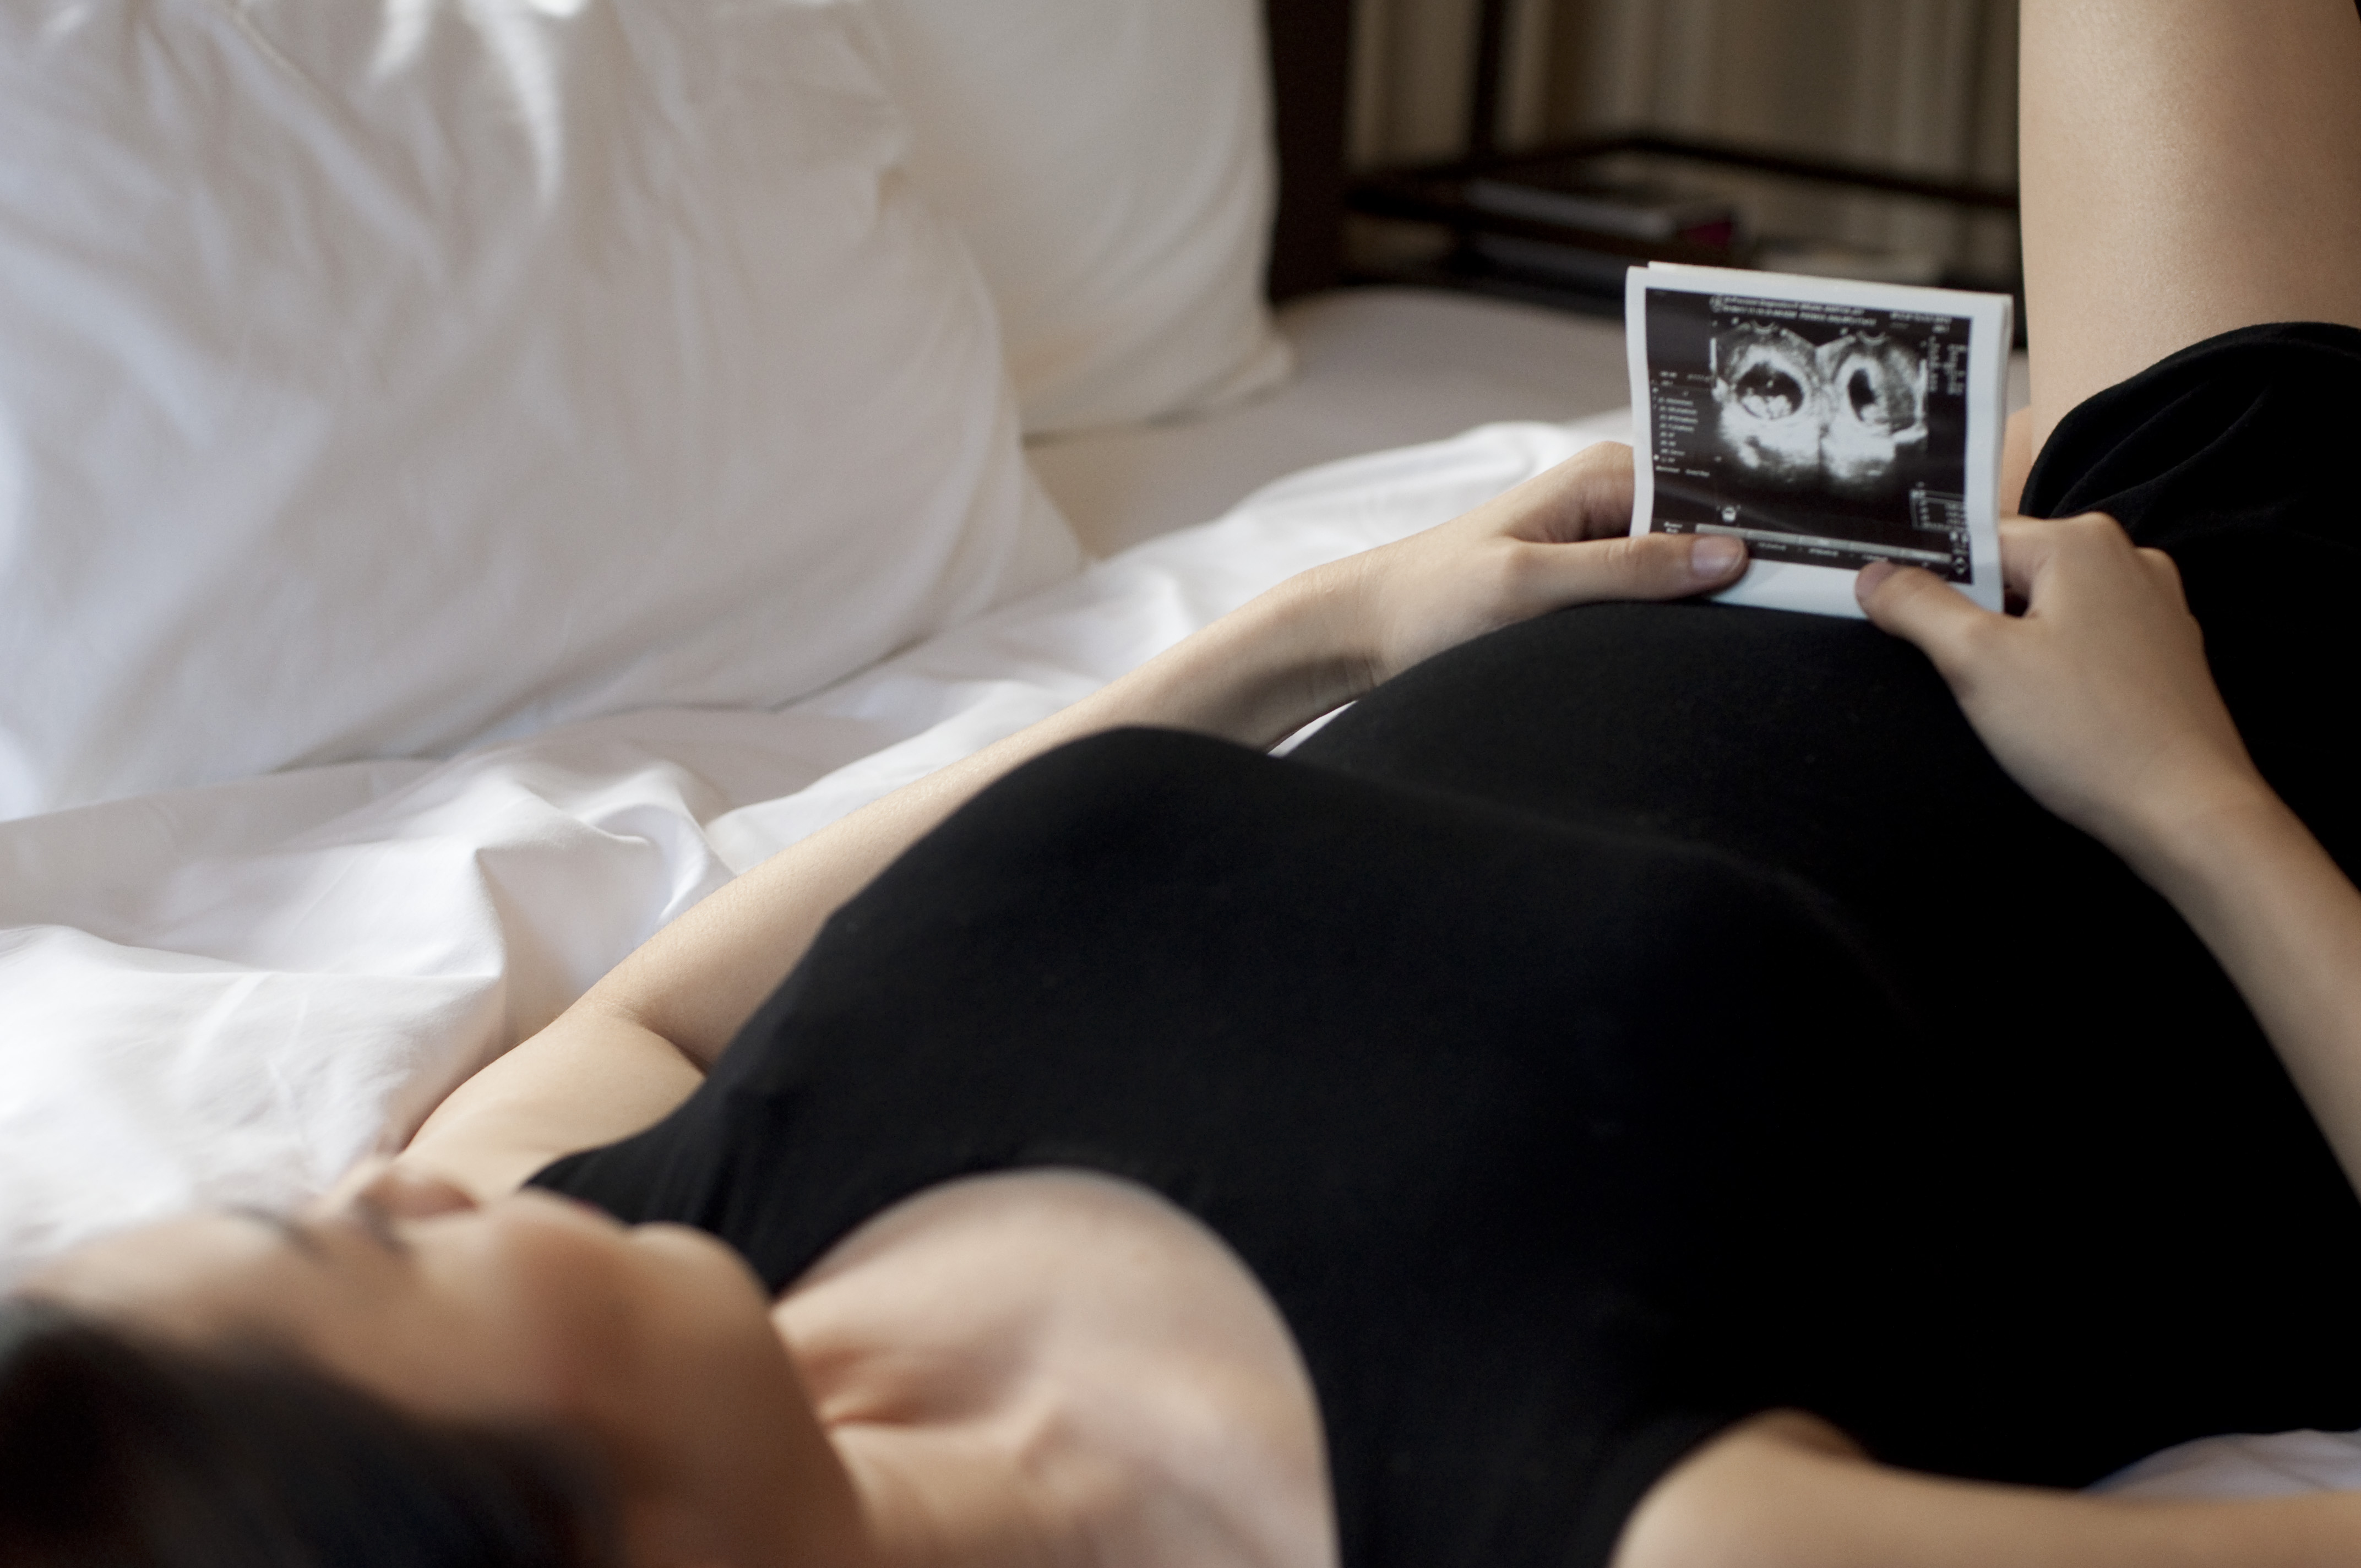 A woman in black dress is holding a sonogram of a baby